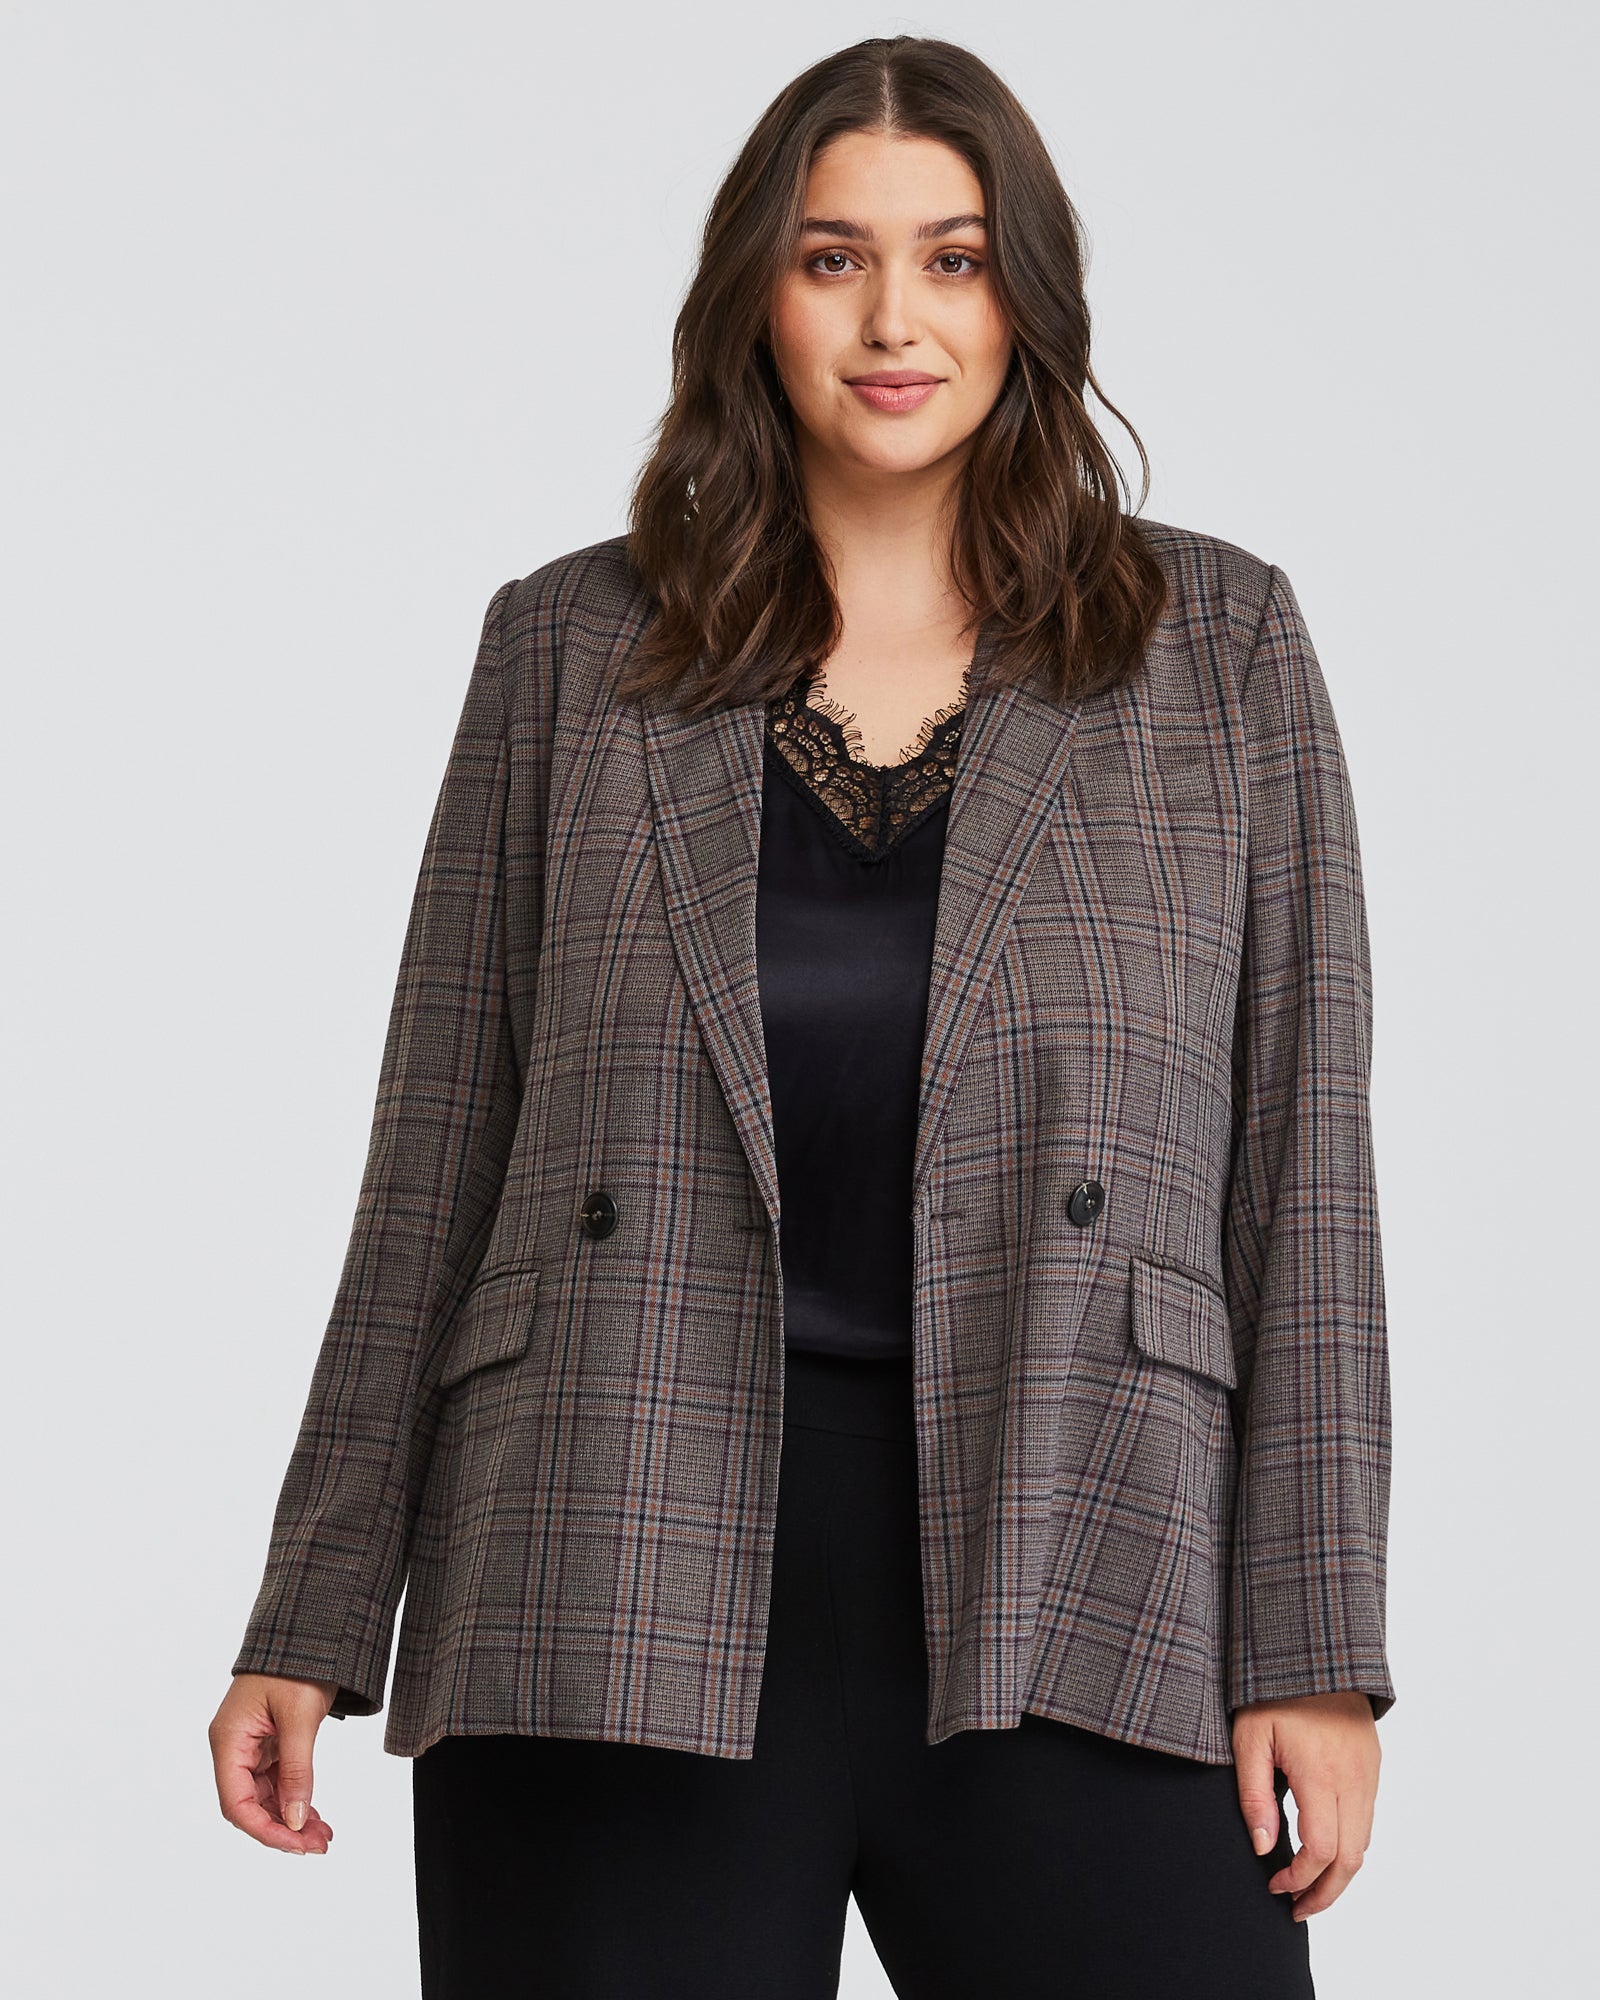 A plus-sized woman wearing a check patterned Lilibet Brown Check Double-Breasted Blazer.